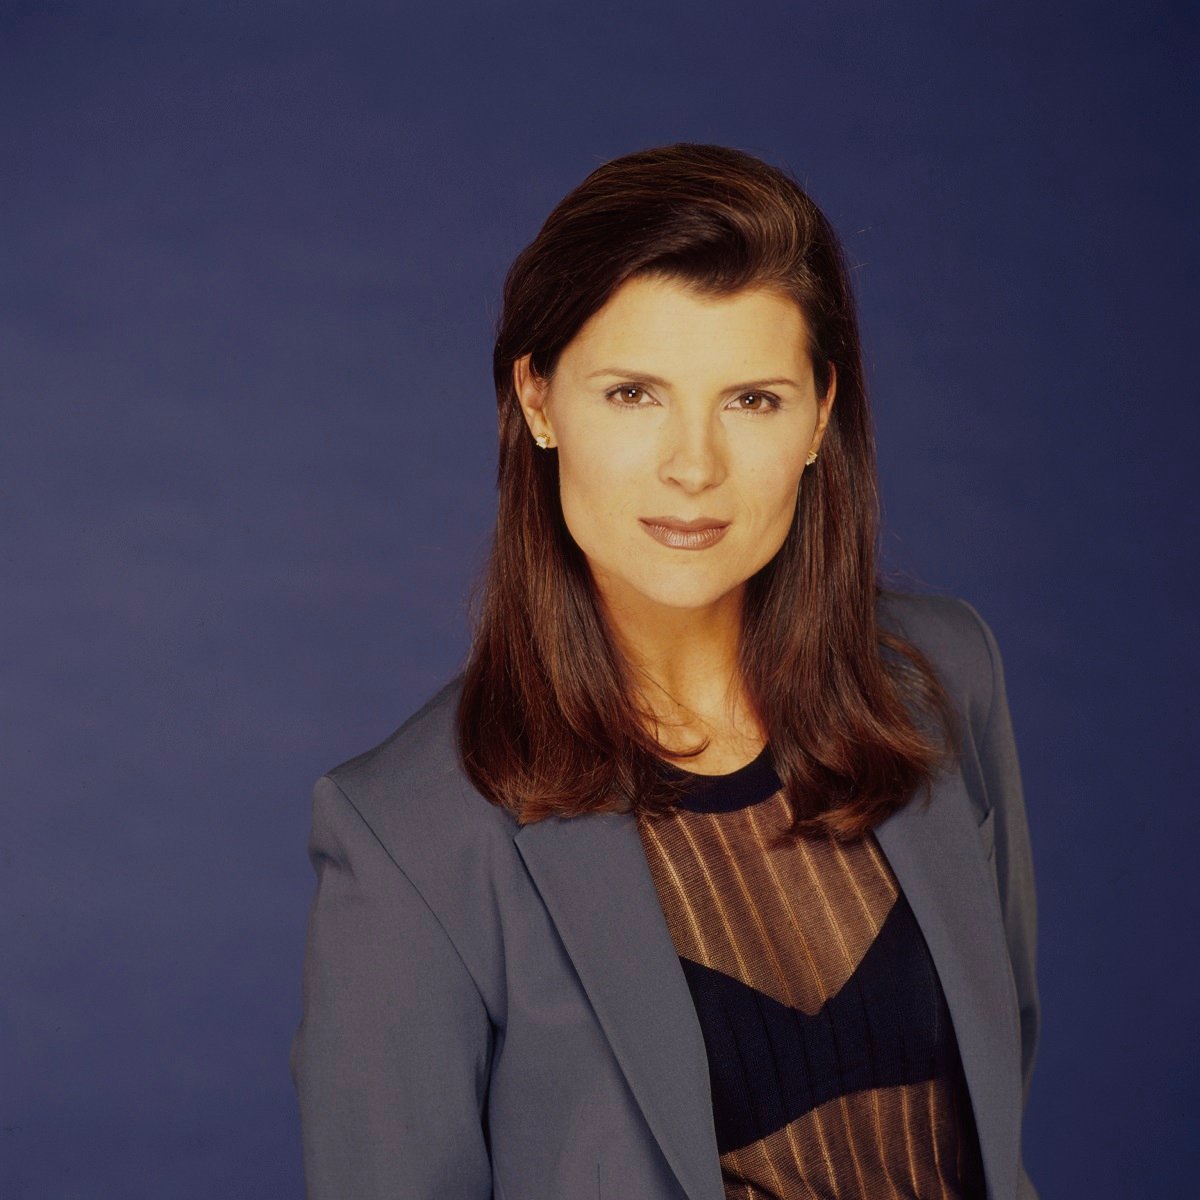 'The Bold and the Beautiful' star Kimberlin Brown wearing a blue suit and posing in front of a blue backdrop.